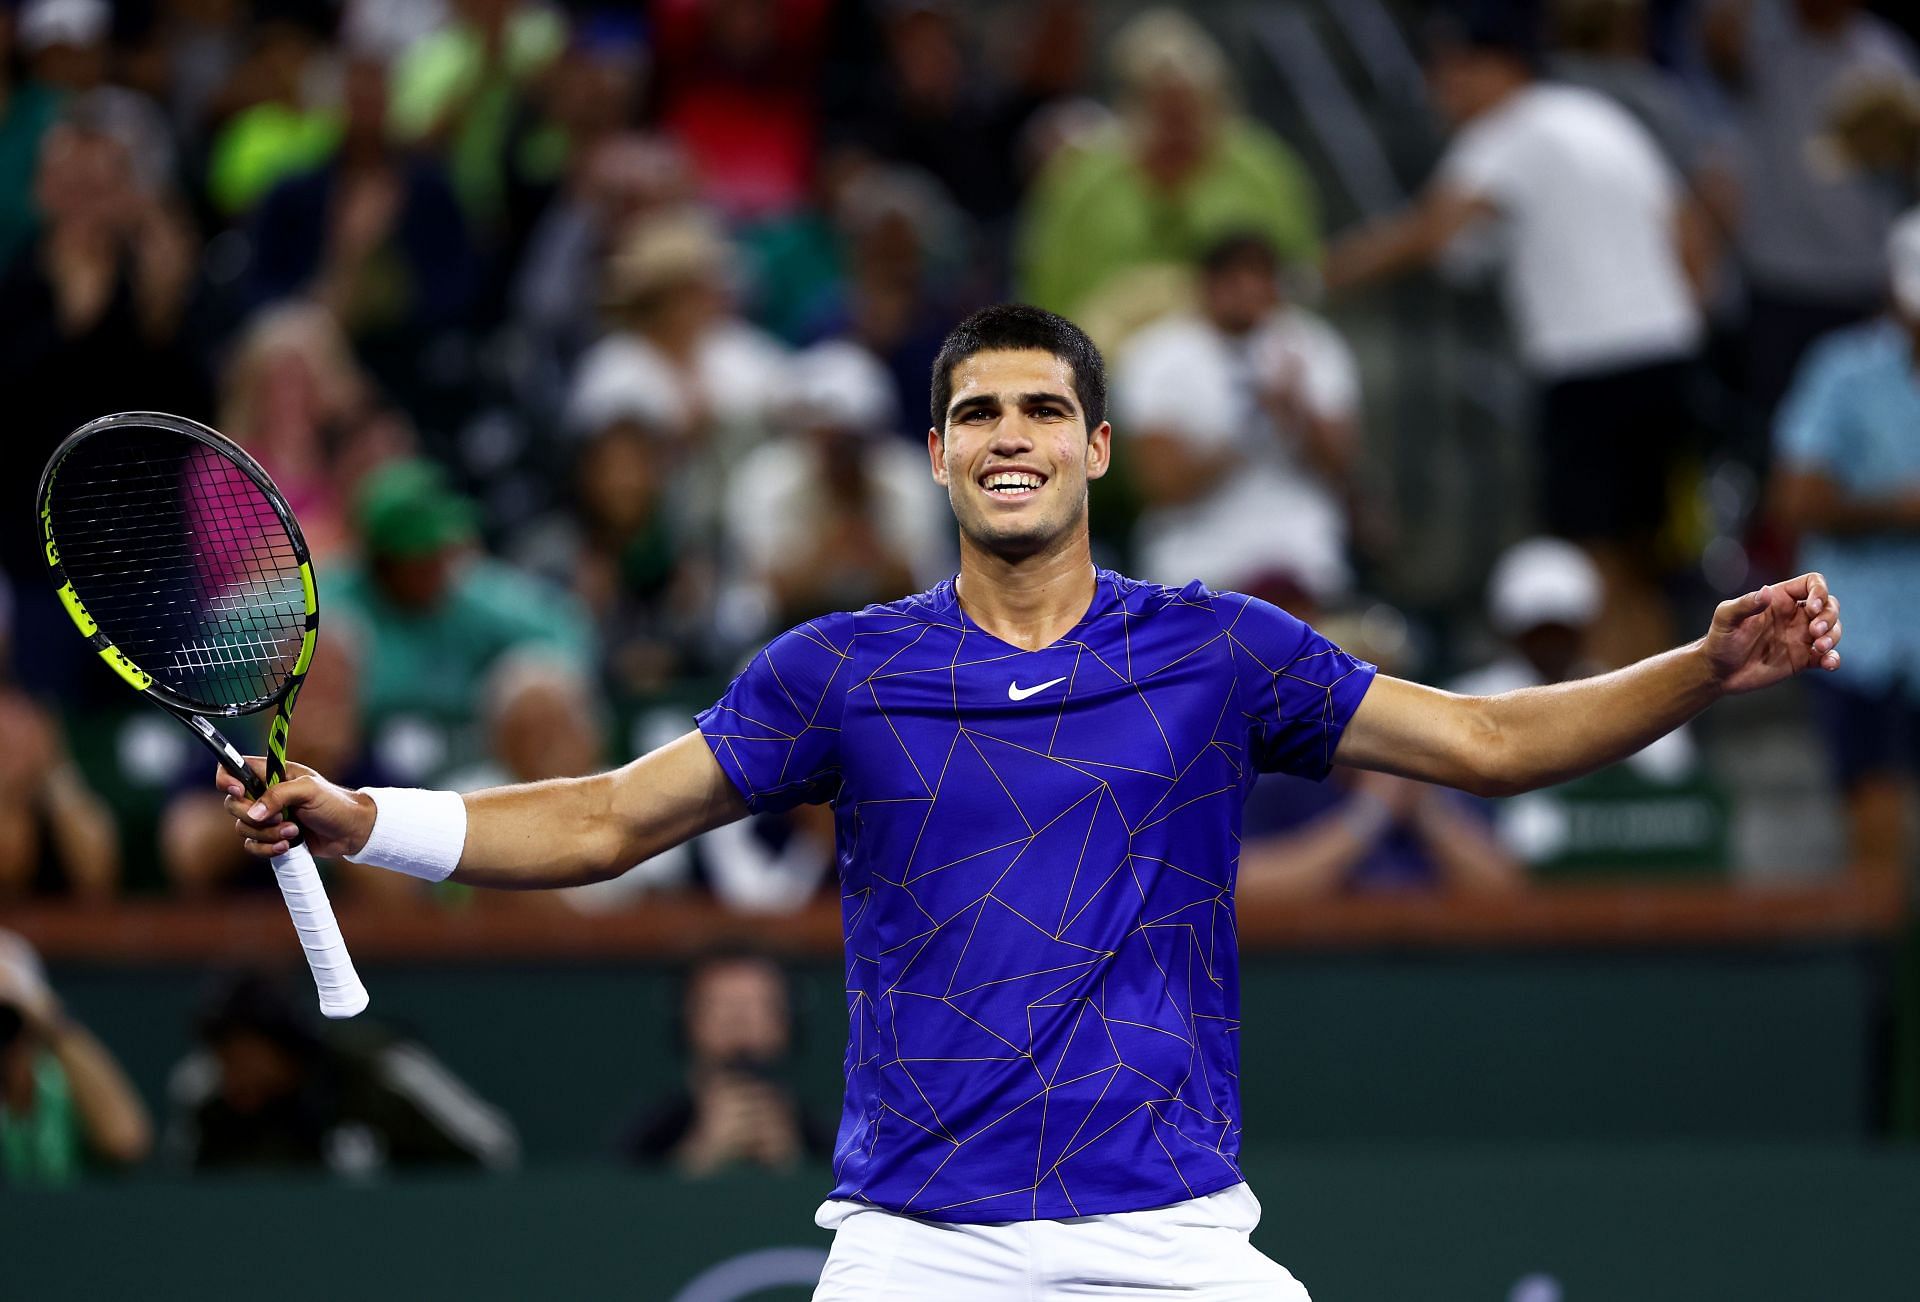 Indian Wells 2023 Schedule Today TV schedule, start time, order of play, live stream details and more BNP Paribas Open, Day 4